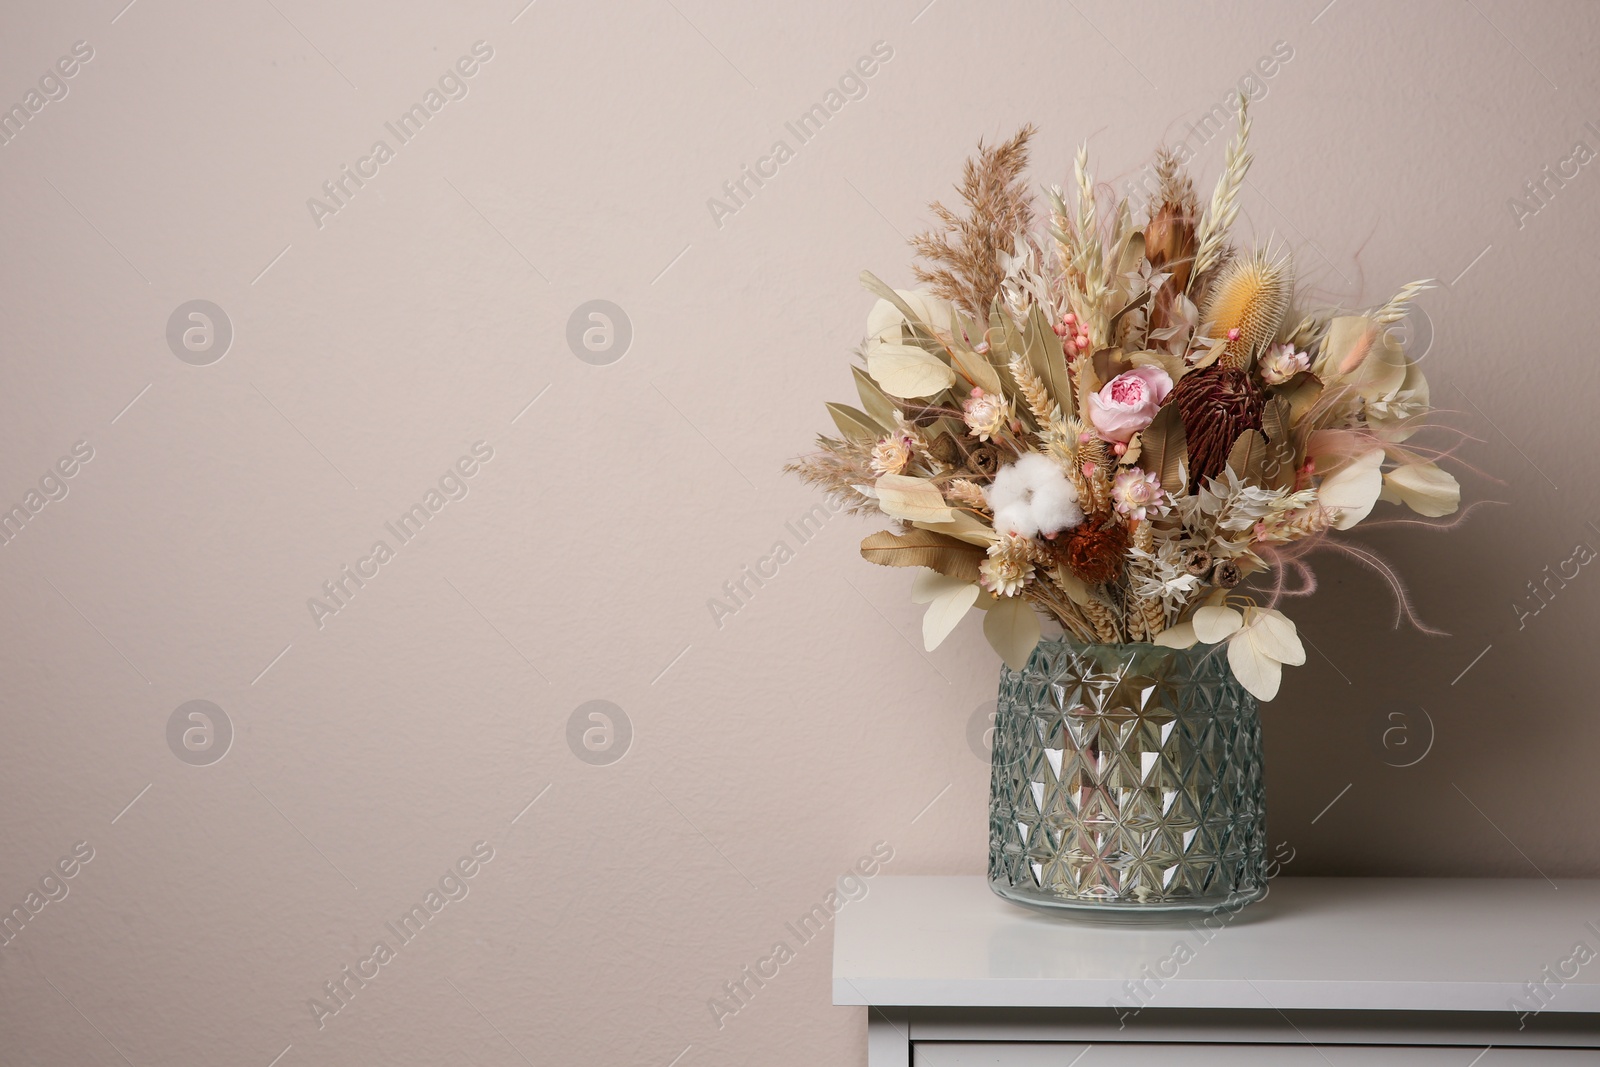 Photo of Beautiful dried flower bouquet in glass vase on white table near light grey wall. Space for text